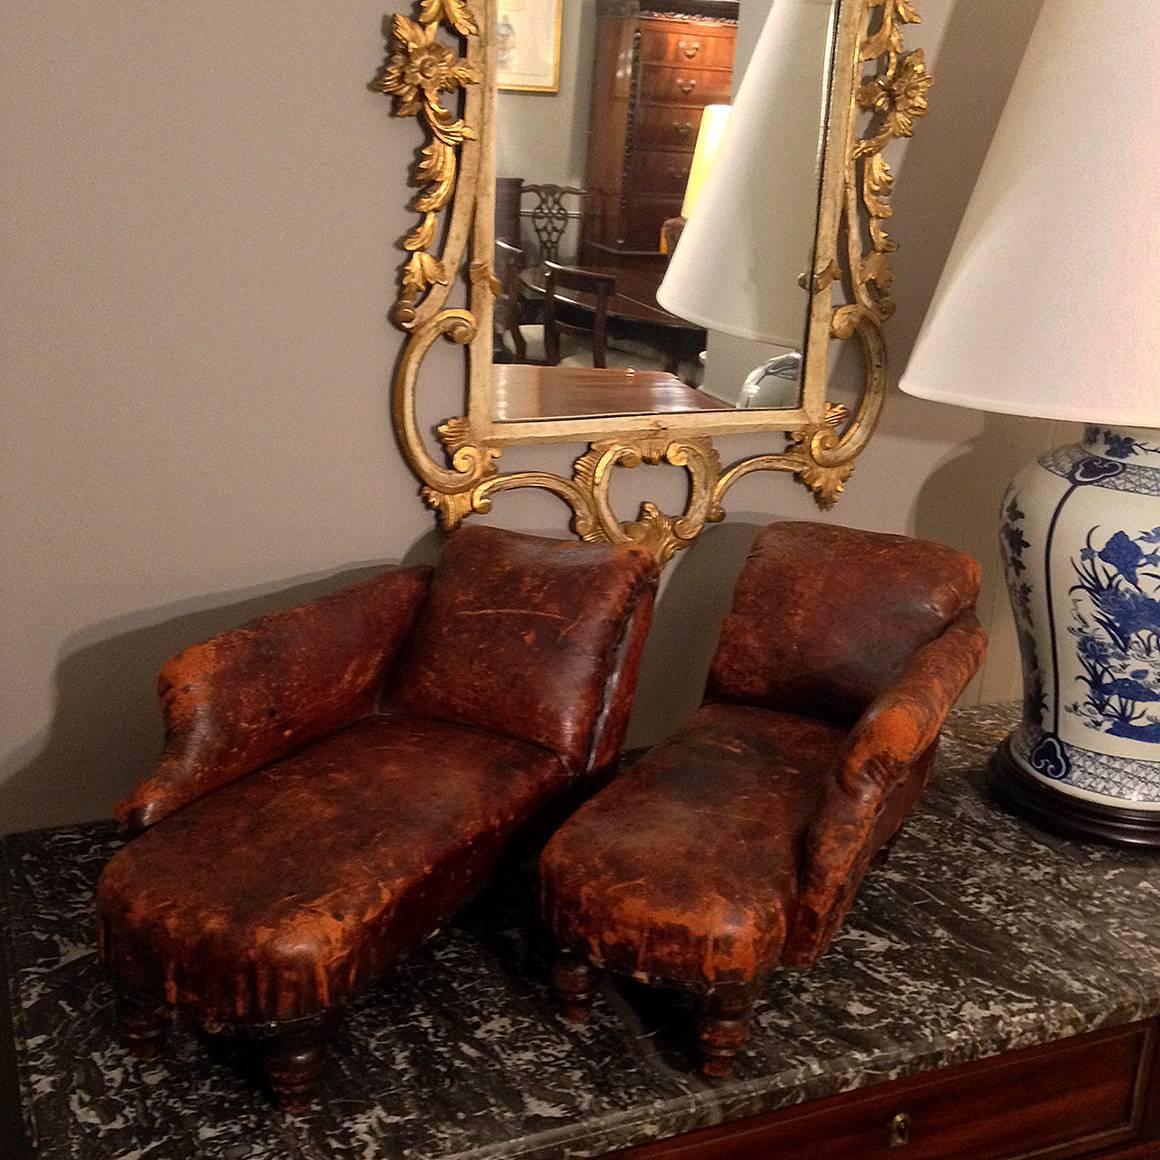 This very unusual pair of miniature French Second Empire méridienne chaise lounges were likely created as a sample or window advertisement by a chair maker. Each is upholstered in leather, on four turned legs.